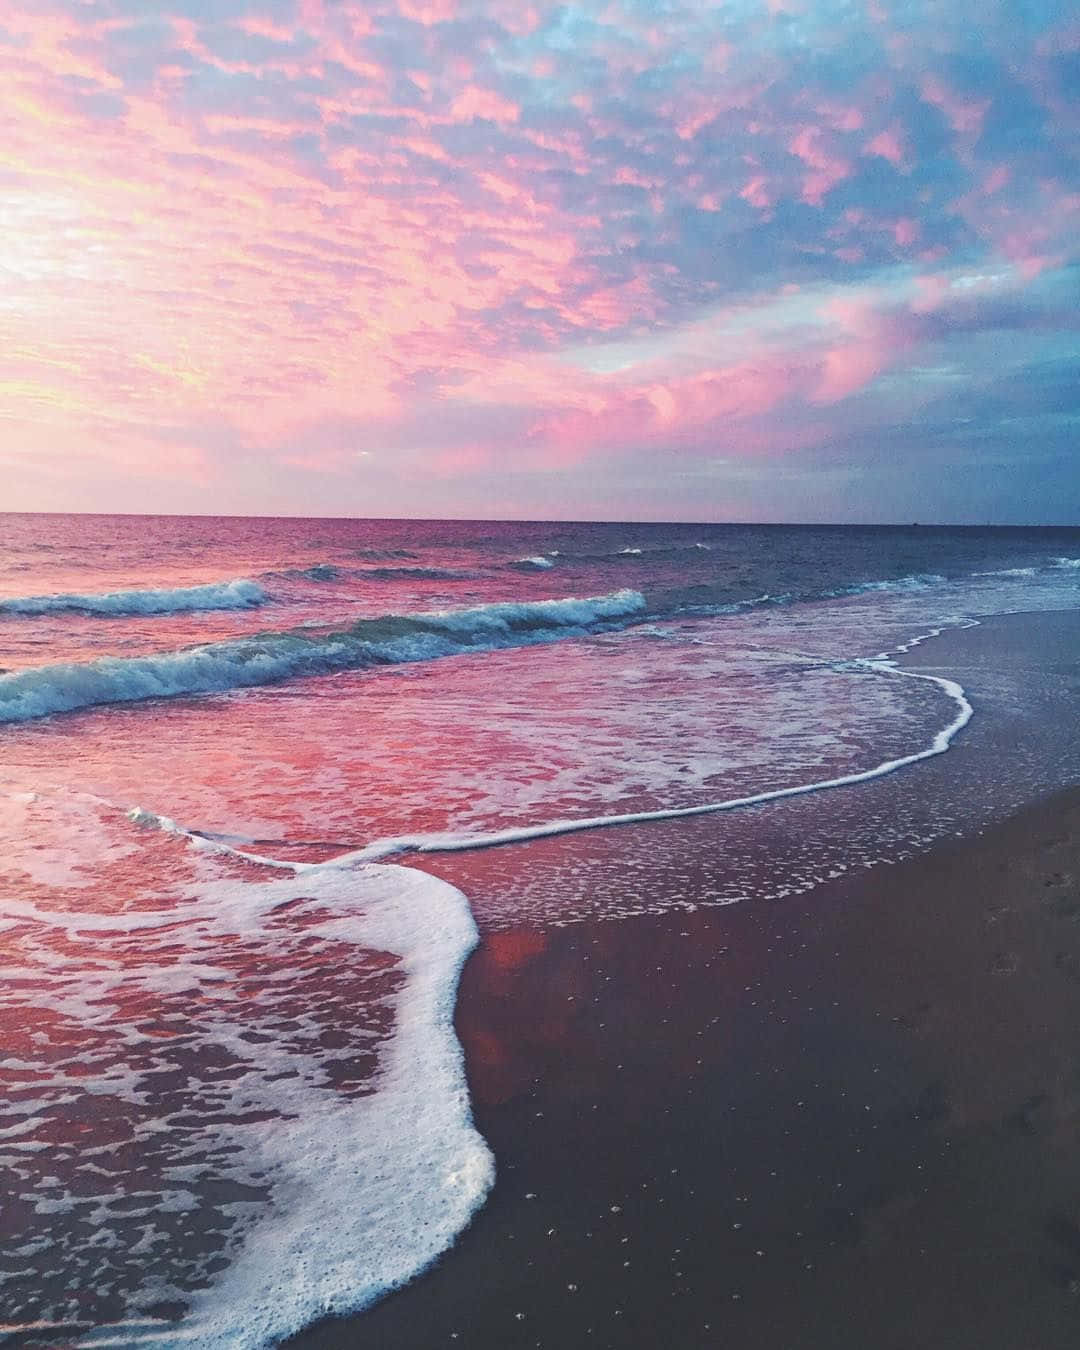 "Find your paradise at the pink beach" Wallpaper